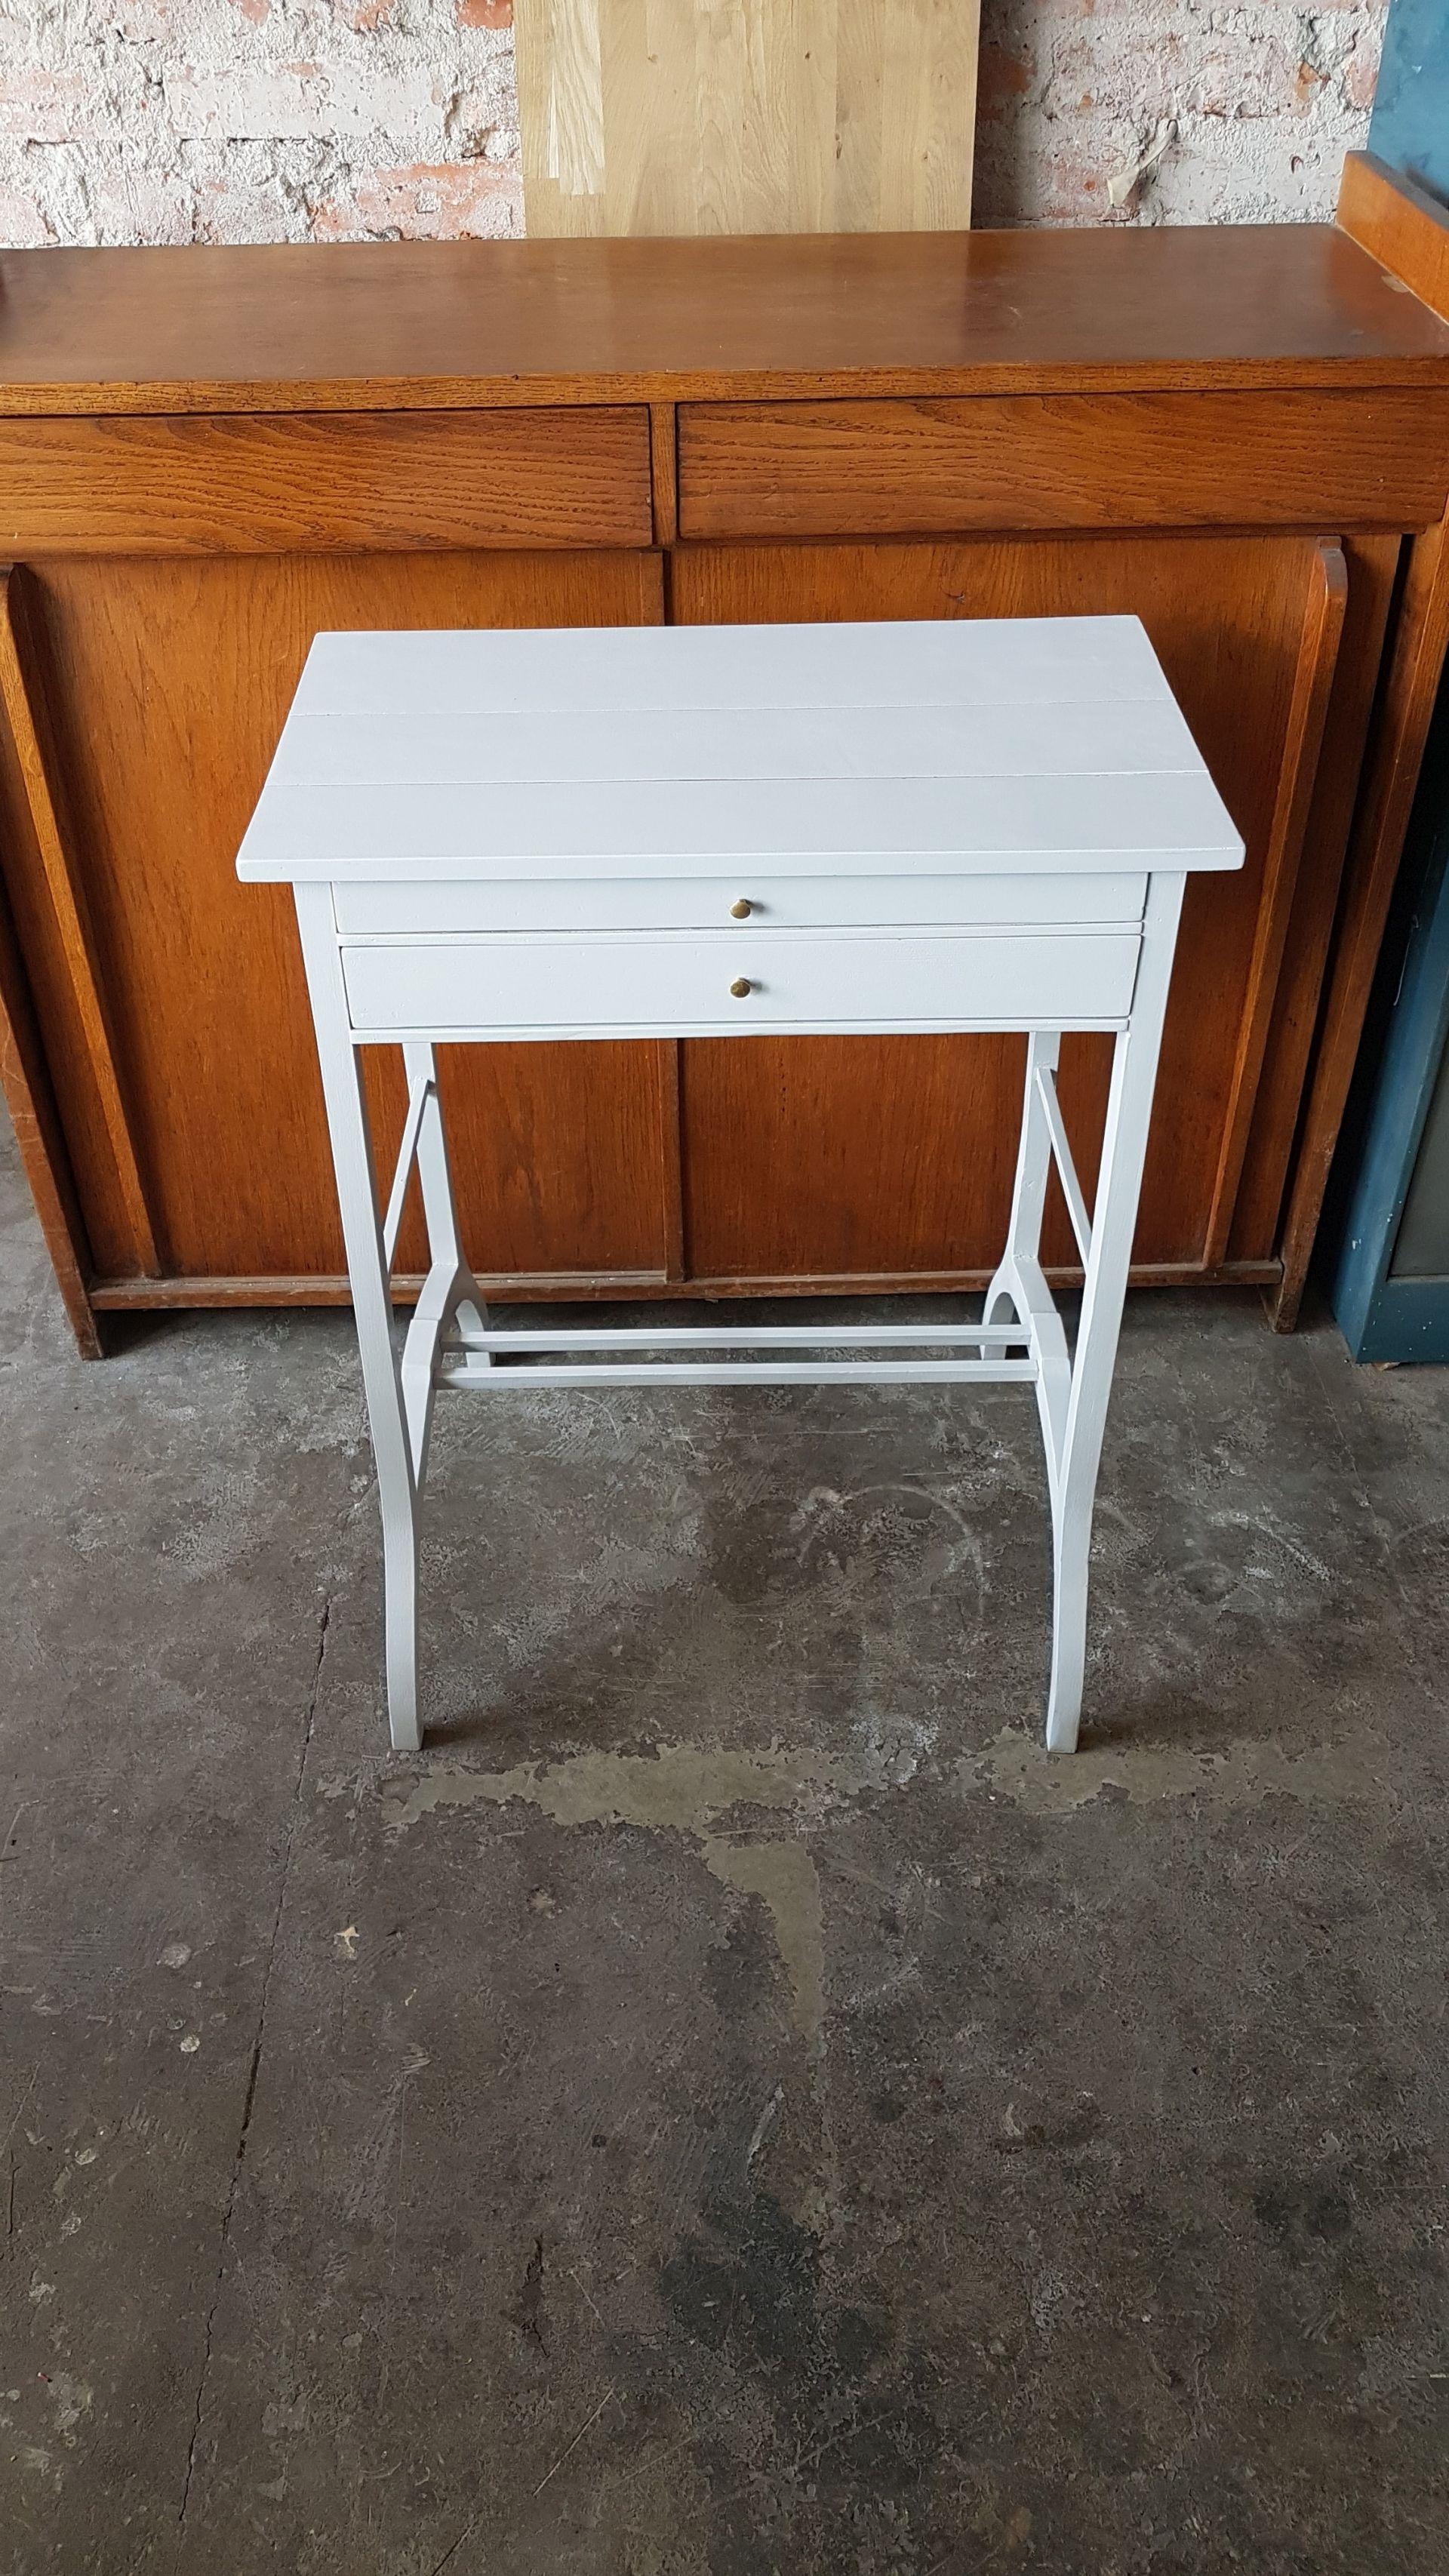 Hand-Crafted Art Deco Console / Dressing Table from Poland Refinished in Light Grey, 1930s